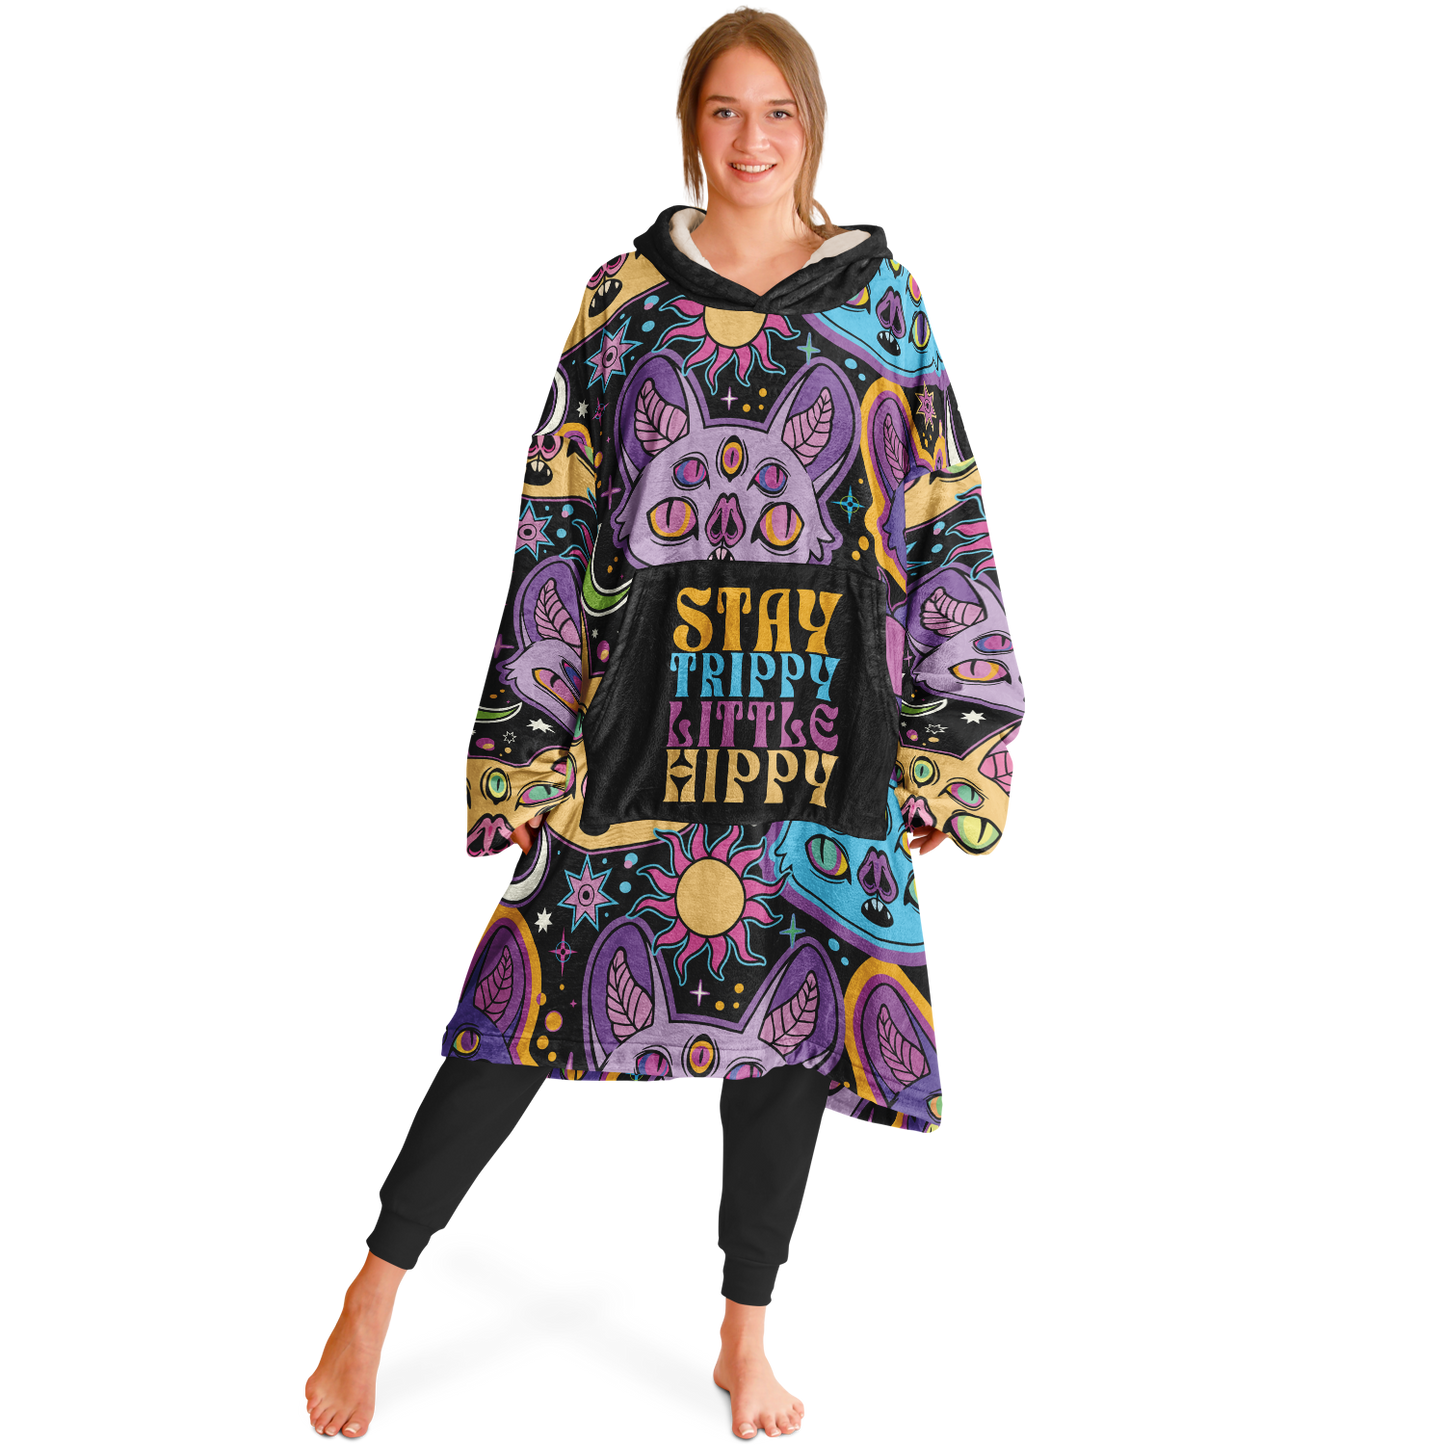 Stay Trippy Little Hippy Super Hoodie - Available for a Strictly Limited Time - Buy 2 & Get FREE Shipping